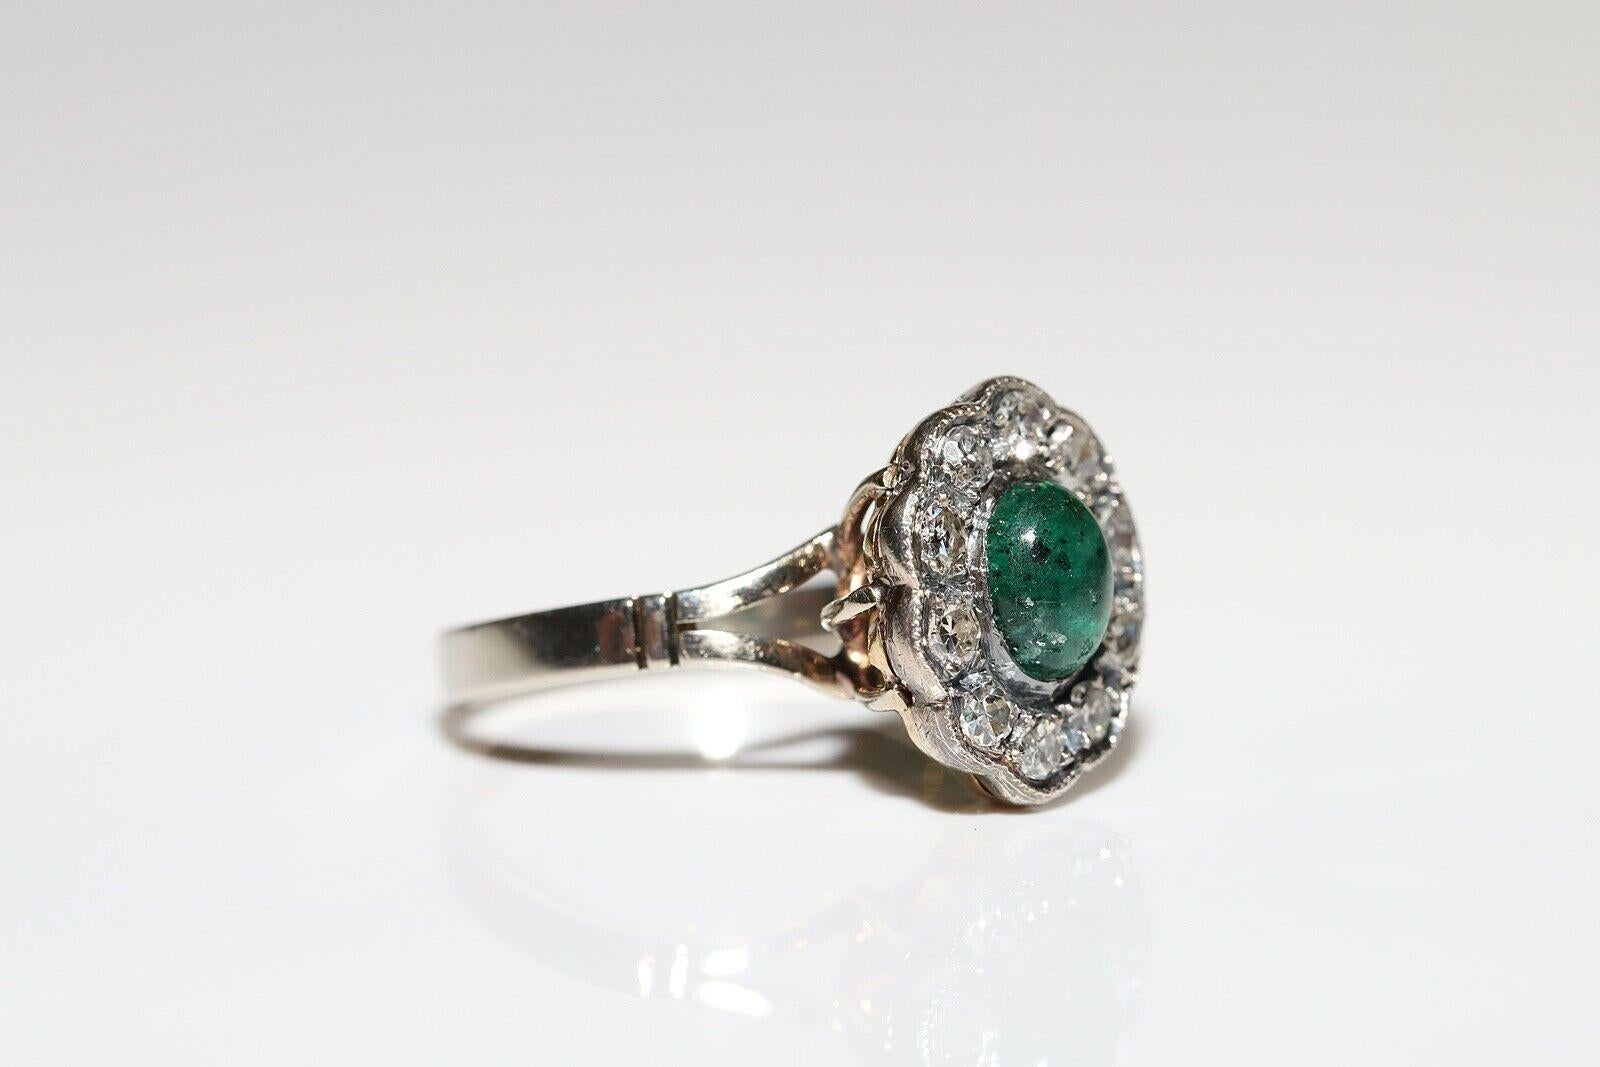 Brilliant Cut Antique 18K Gold Top Silver Natural Diamond And Cabochon Emerald Ring For Sale